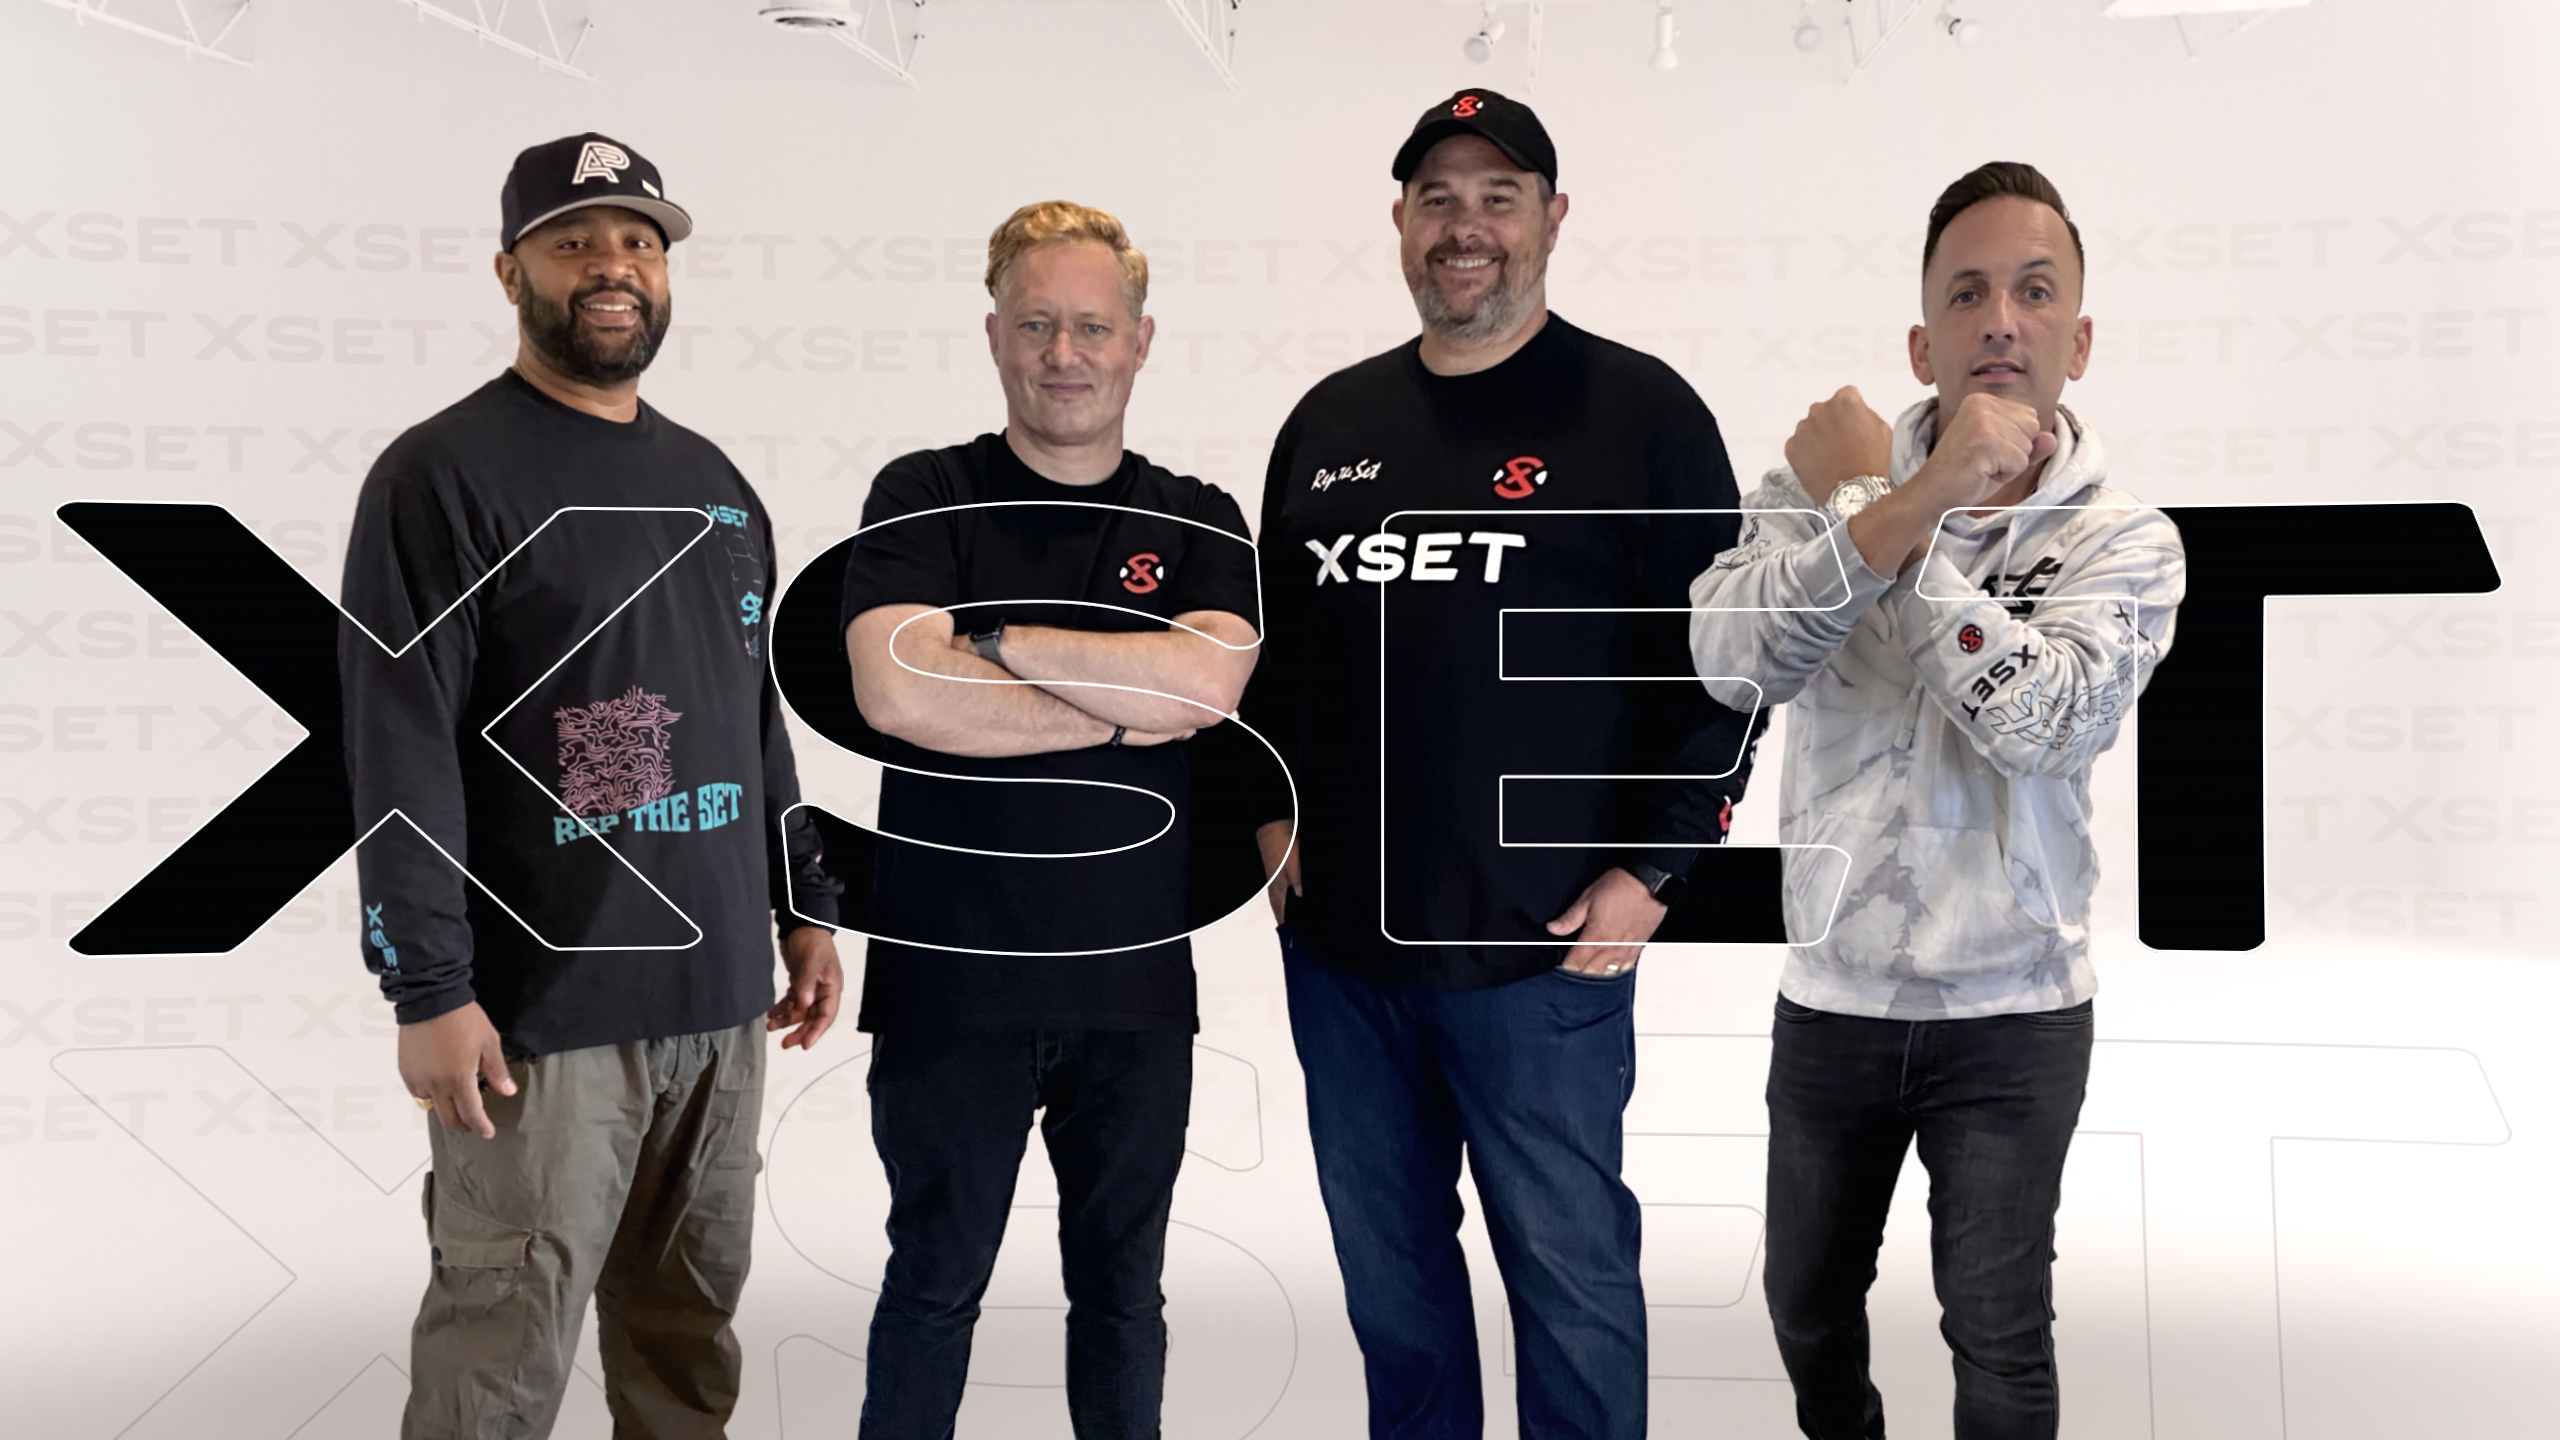 XSET founders making an x with their hands standing side by side